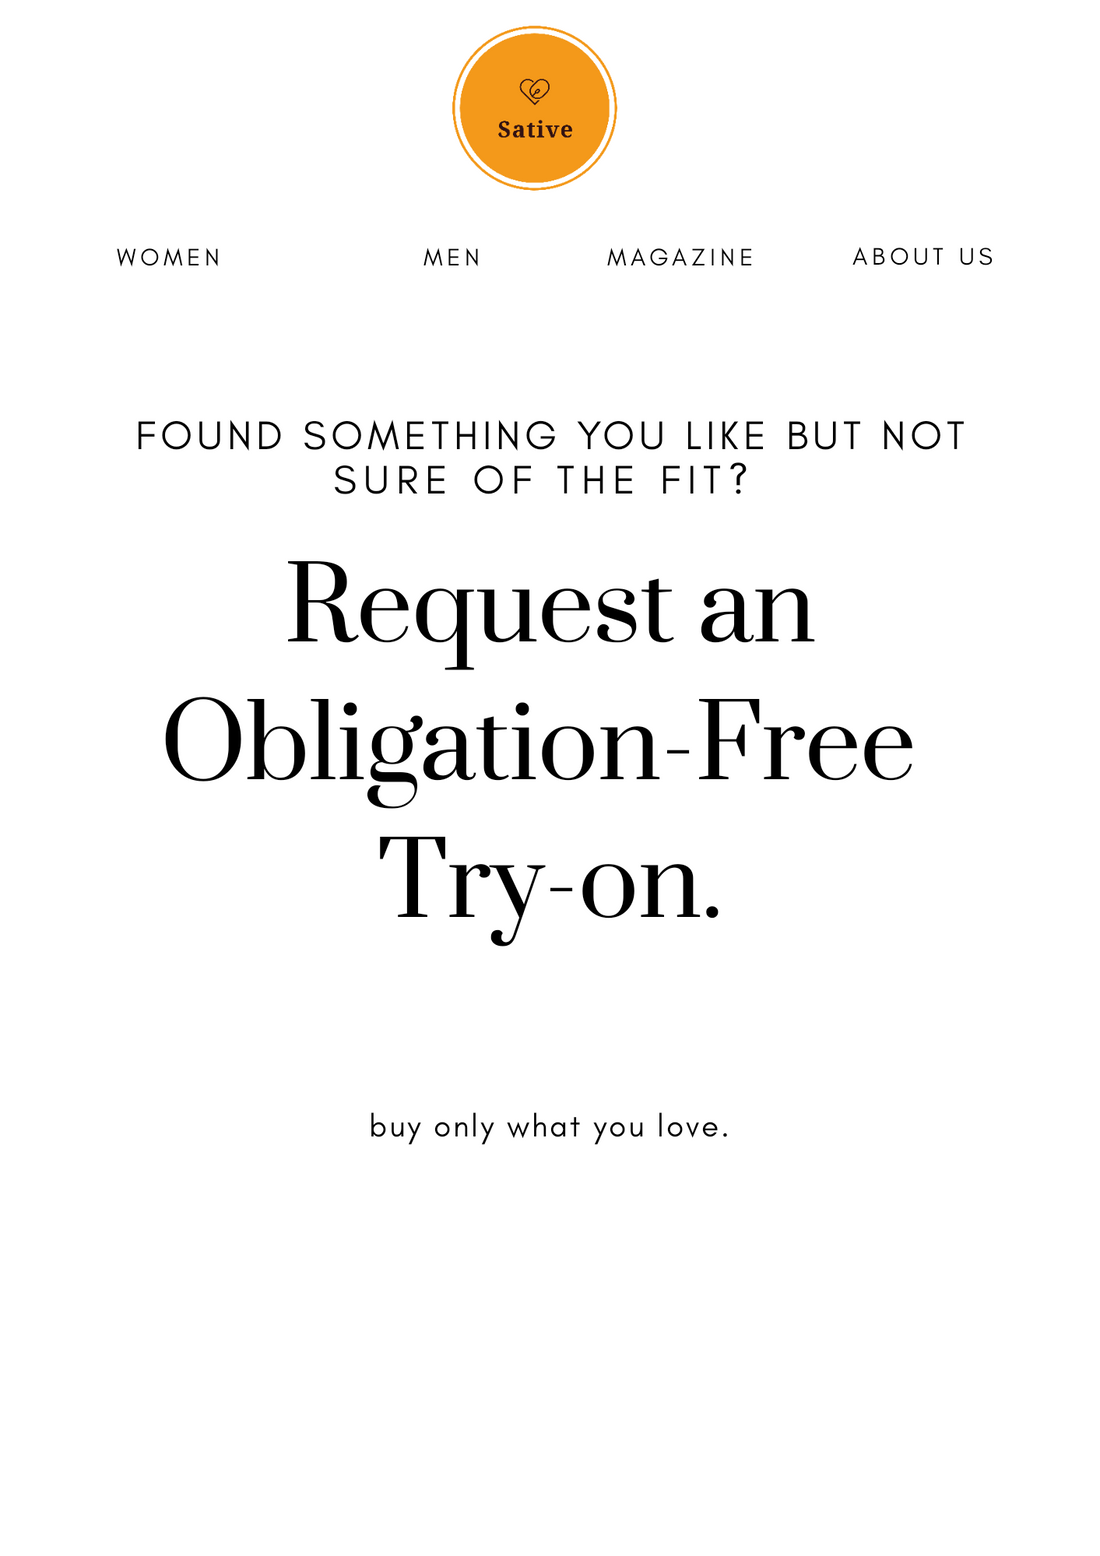 Request an obligation-free try-on